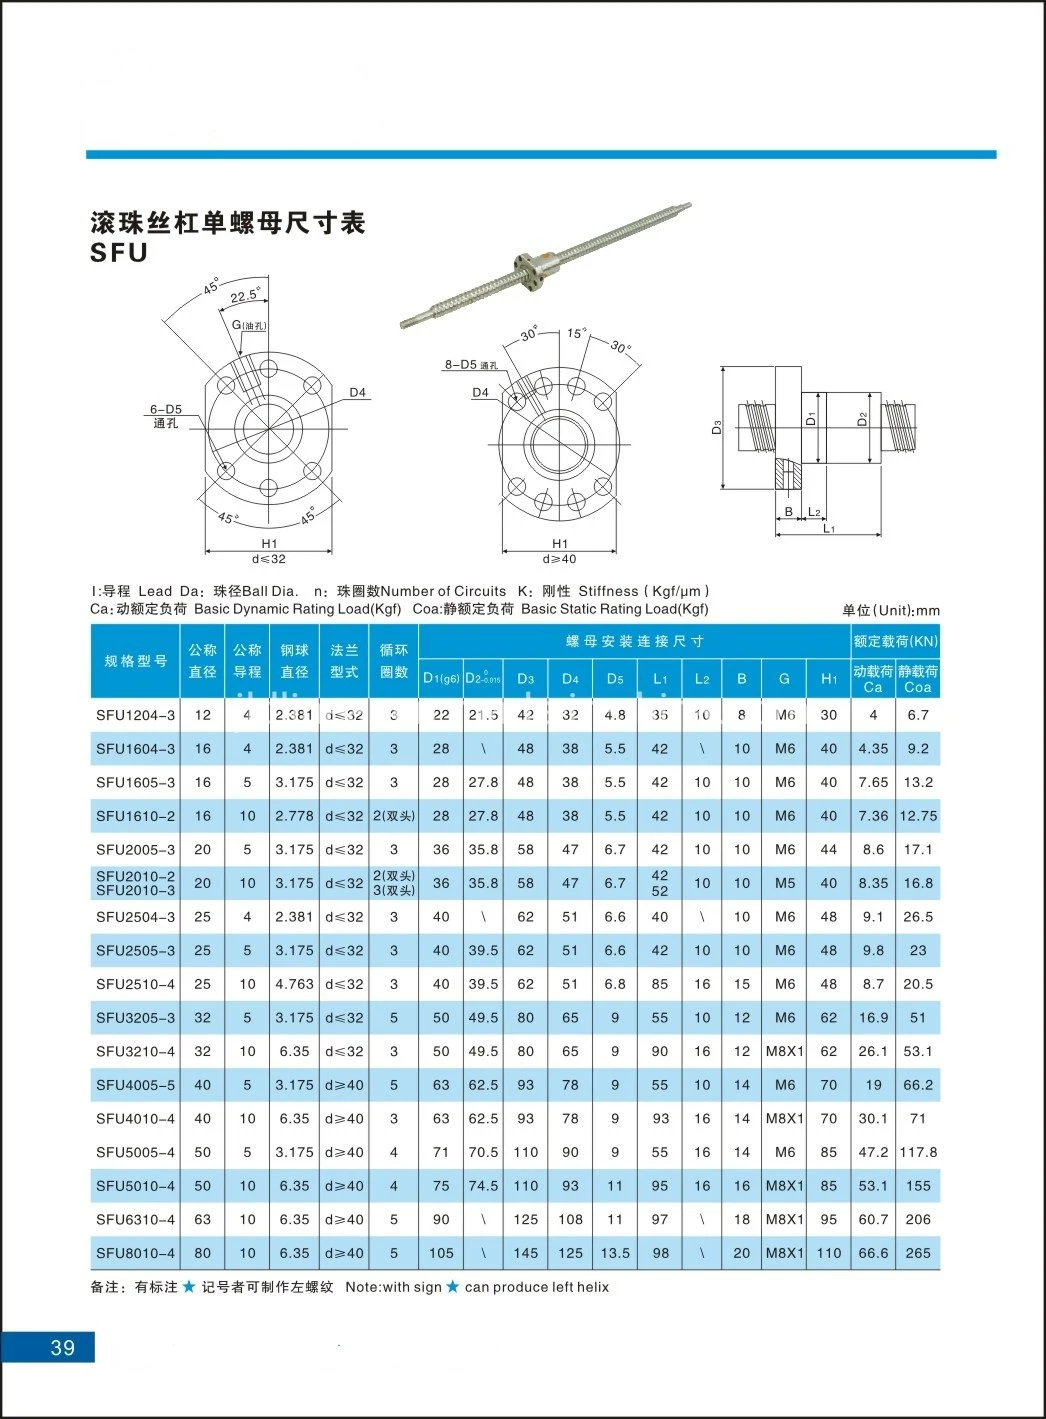 China CNC Router Precision Rolled/Ground Linear Motion Ball Screw (6mm-80mm) with Nut (SFU SFK SFA SFS SFY) Following Tbi Size Miniature/Large Lead Nice Prices